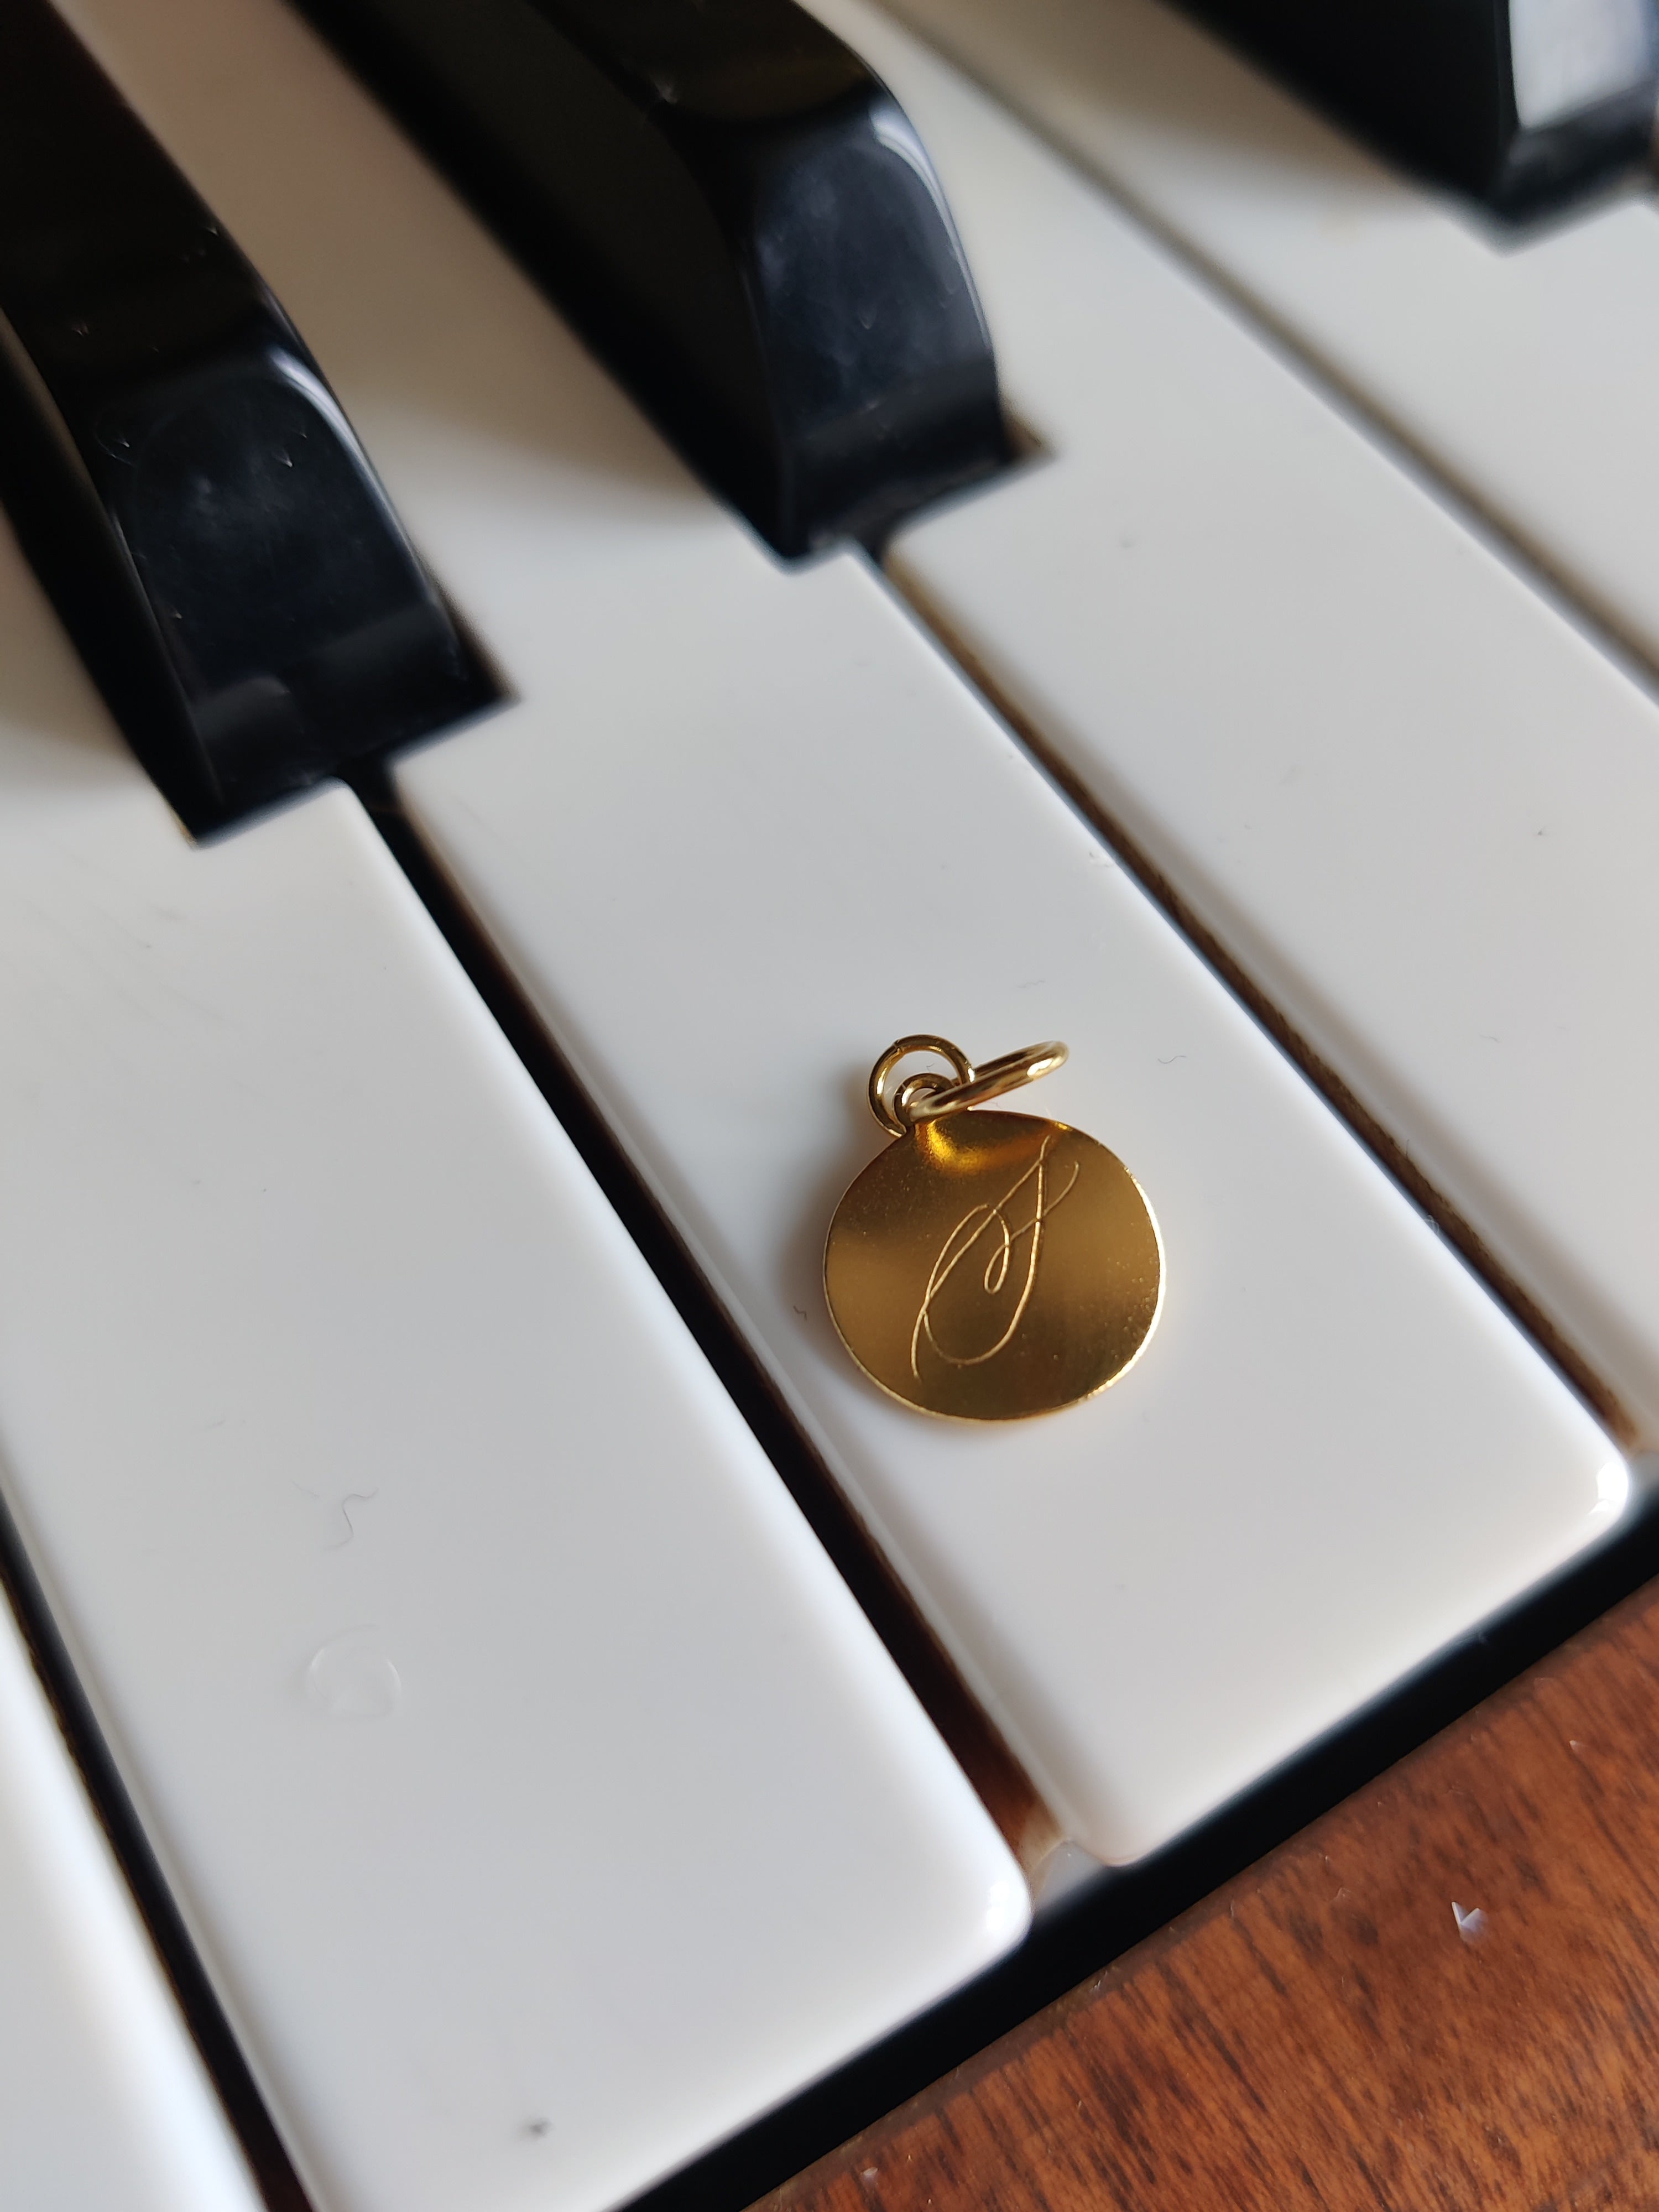 Dreamer coin on Piano